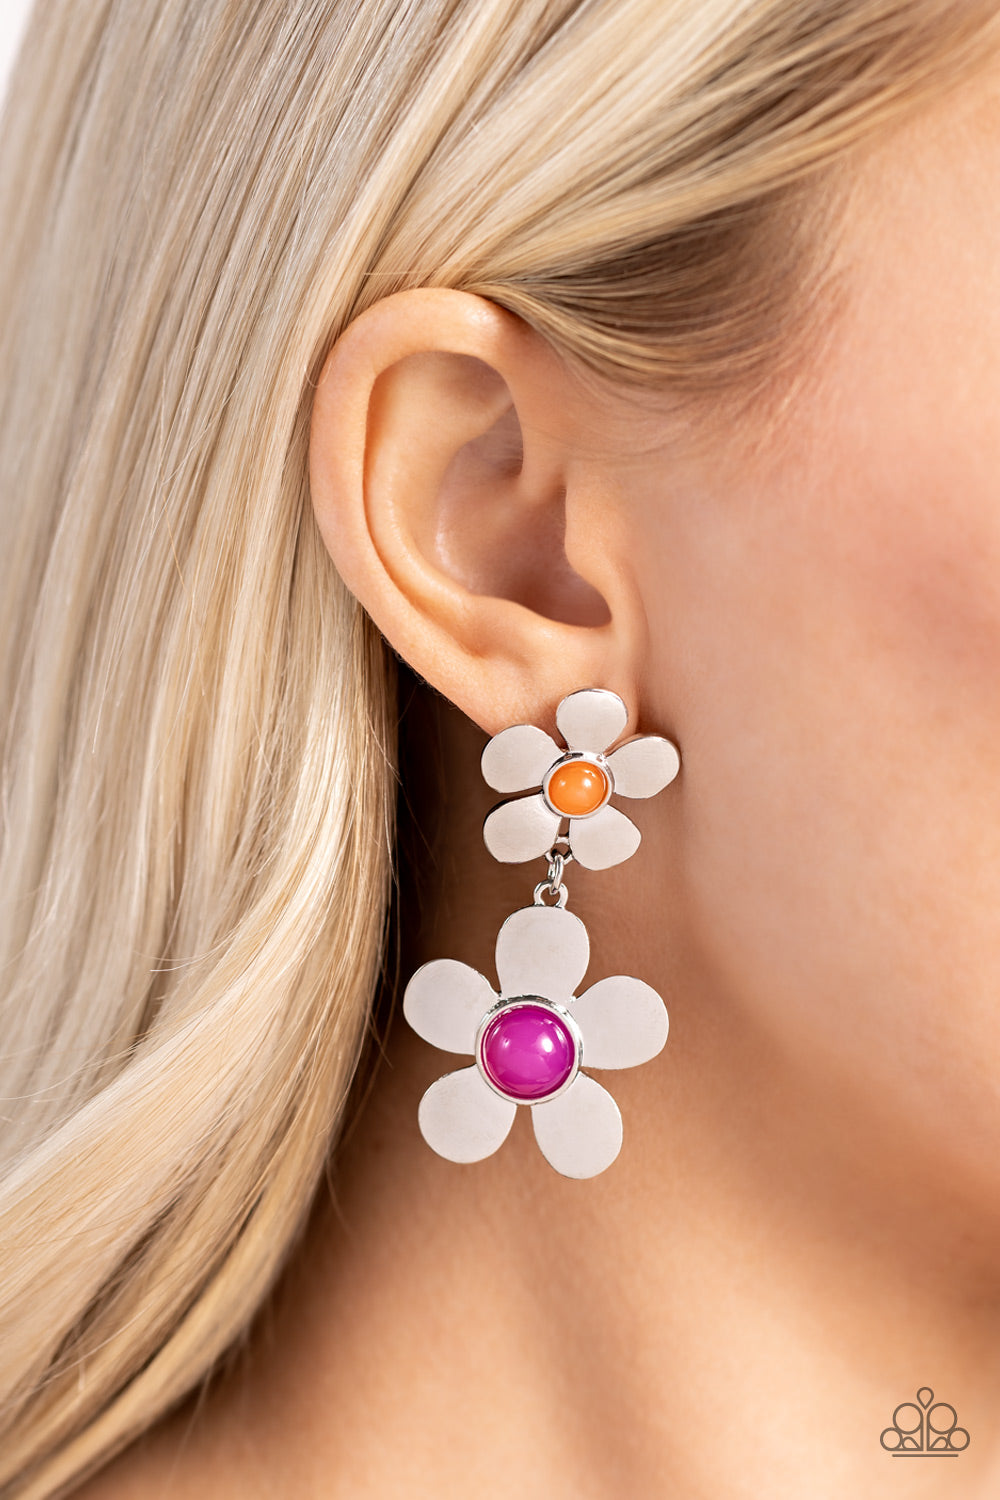 Paparazzi Fashionable Florals - Pink Earrings